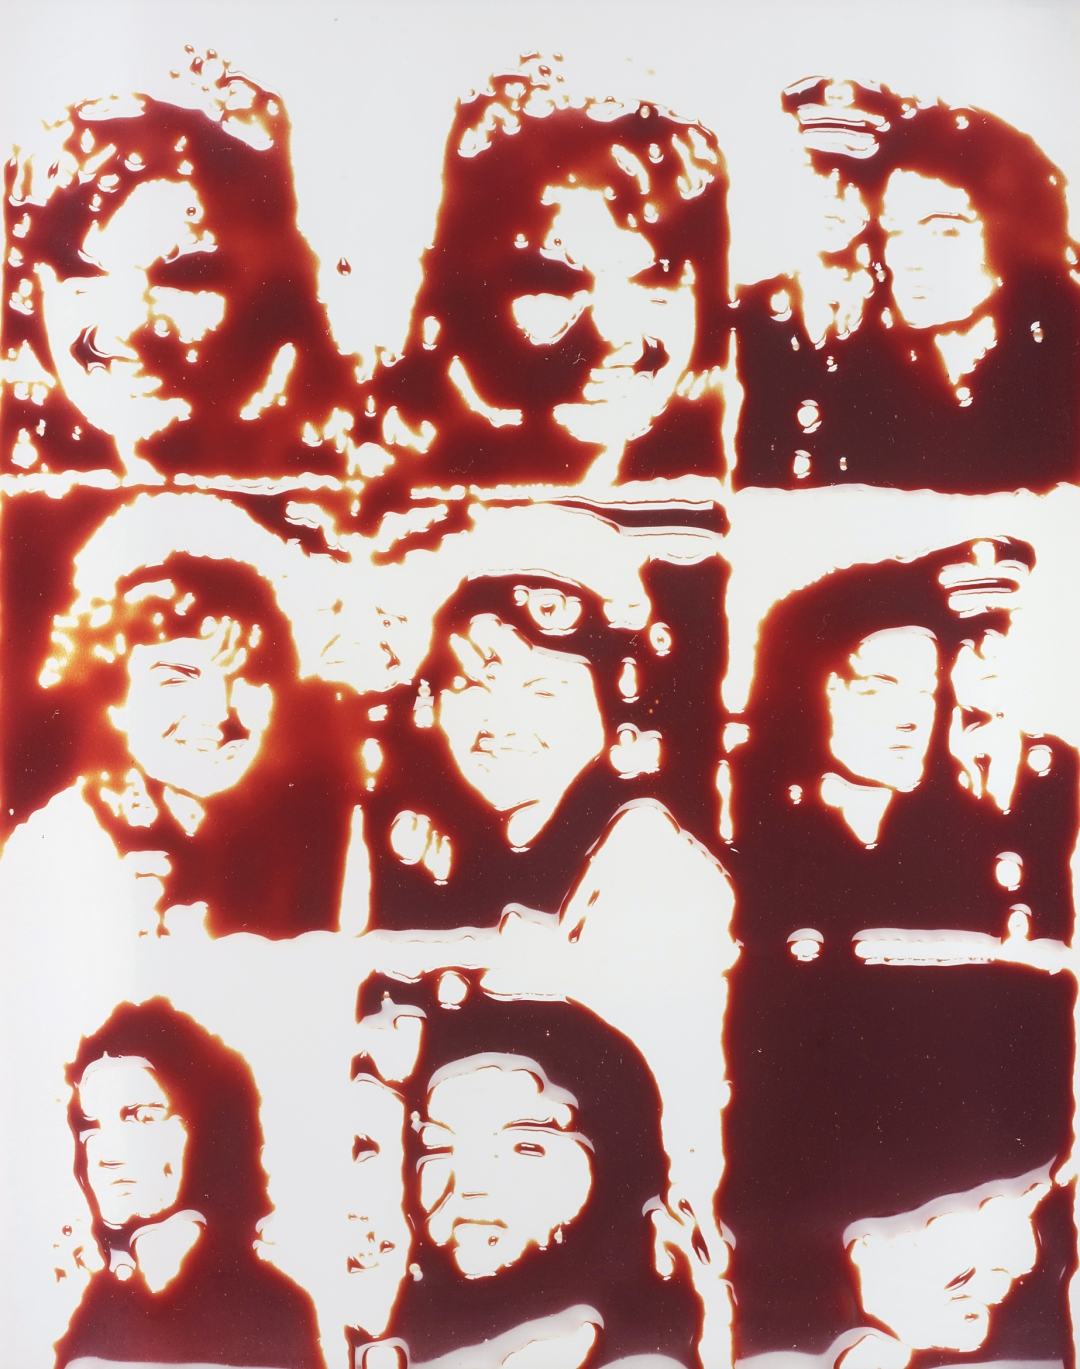 Vik Muniz, <i>Jackie (from Pictures of Chocolate)</i>, 2001, Cibachrome print, 62 1/4 x 49 1/4 in. (158 x 125 cm), Numbered 2 of 3 artist's proof